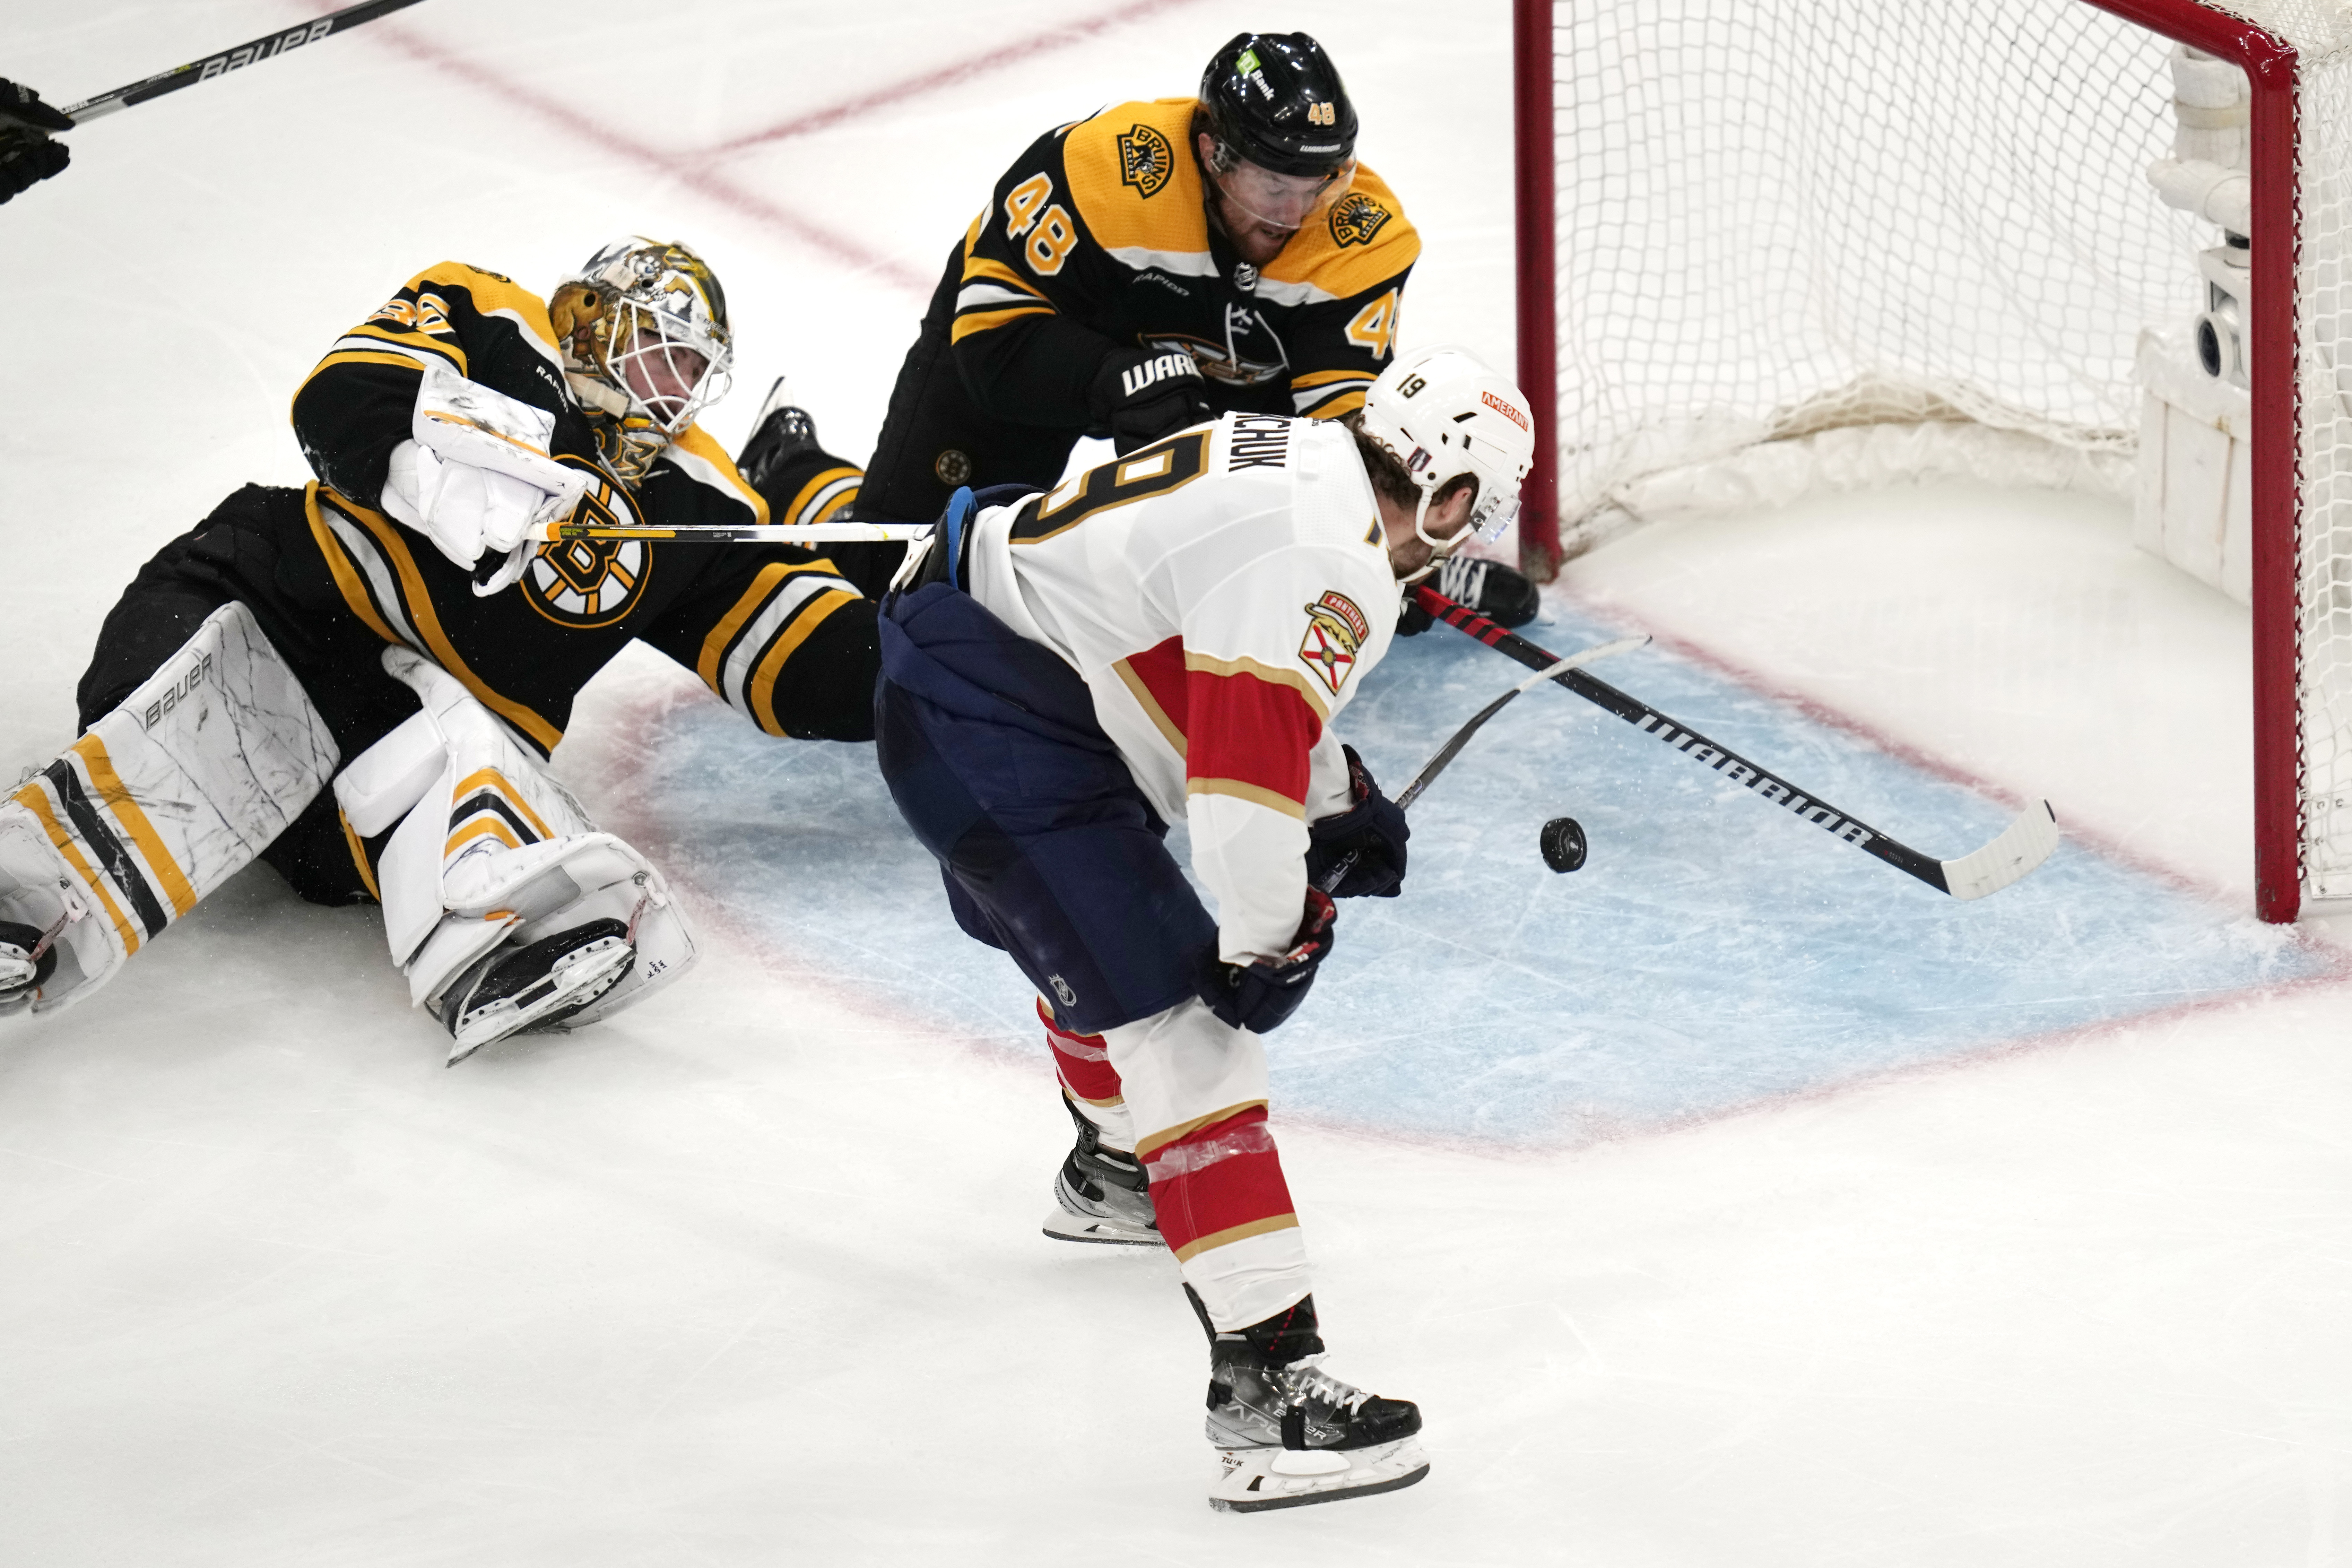 Panthers oust record-setting Bruins 4-3 in OT in Game 7